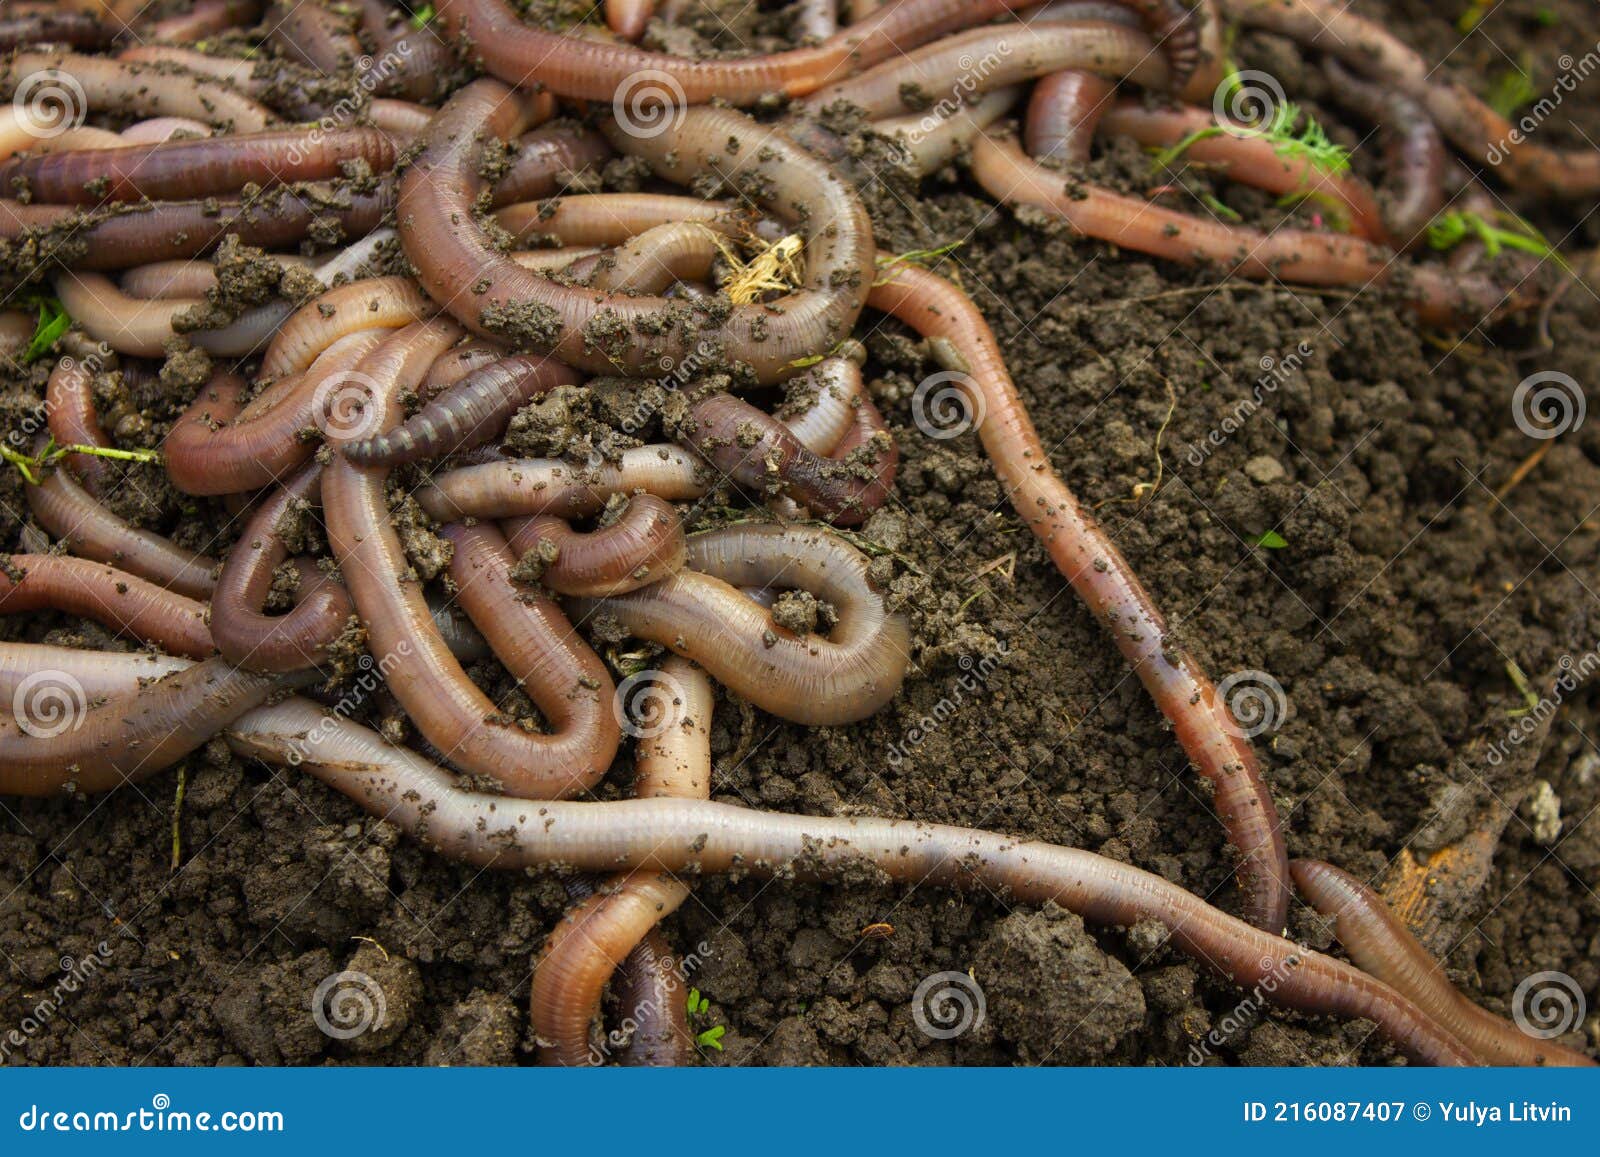 A Large Pile of Live Worms that Lies on the Ground. Fishing Bait